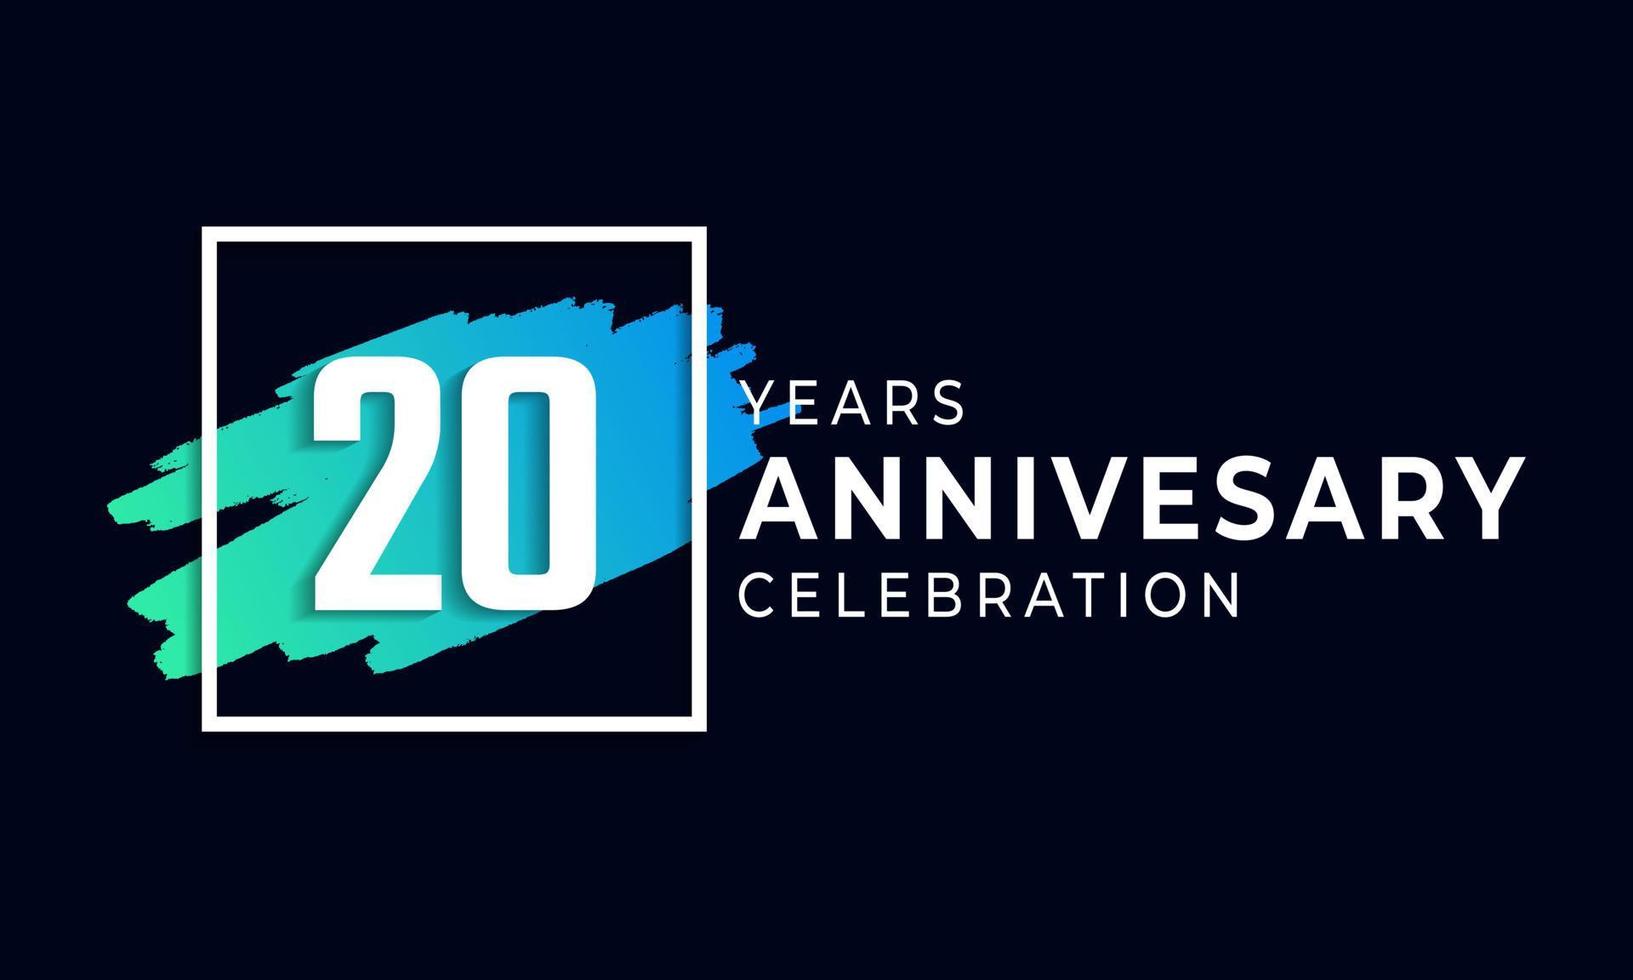 20 Year Anniversary Celebration with Blue Brush and Square Symbol. Happy Anniversary Greeting Celebrates Event Isolated on Black Background vector